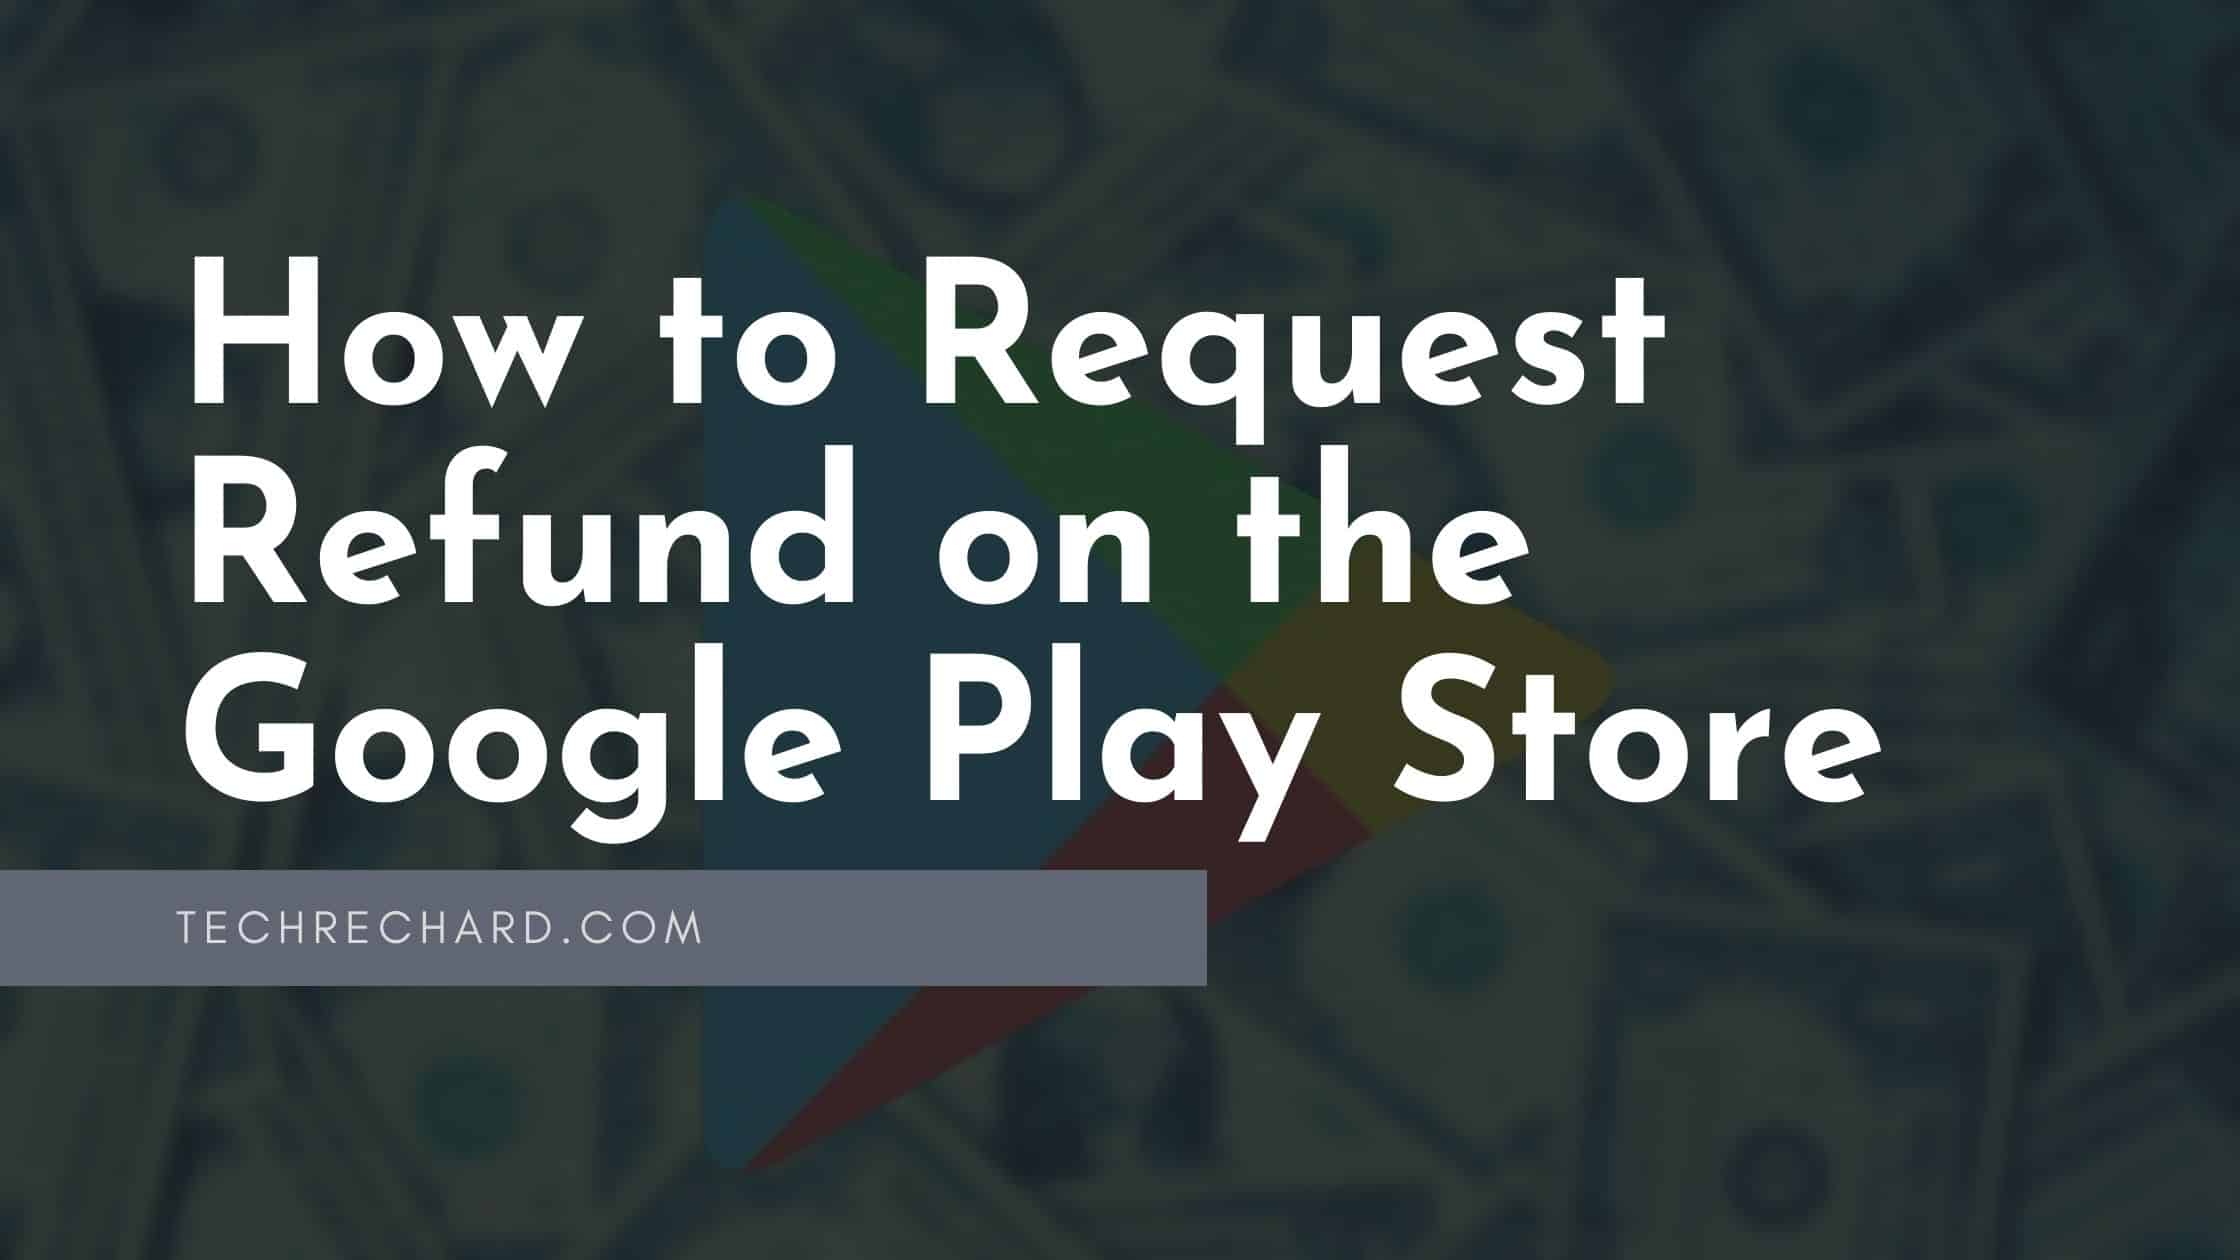 How to Request Refund on the Google Play Store: Easy Guide